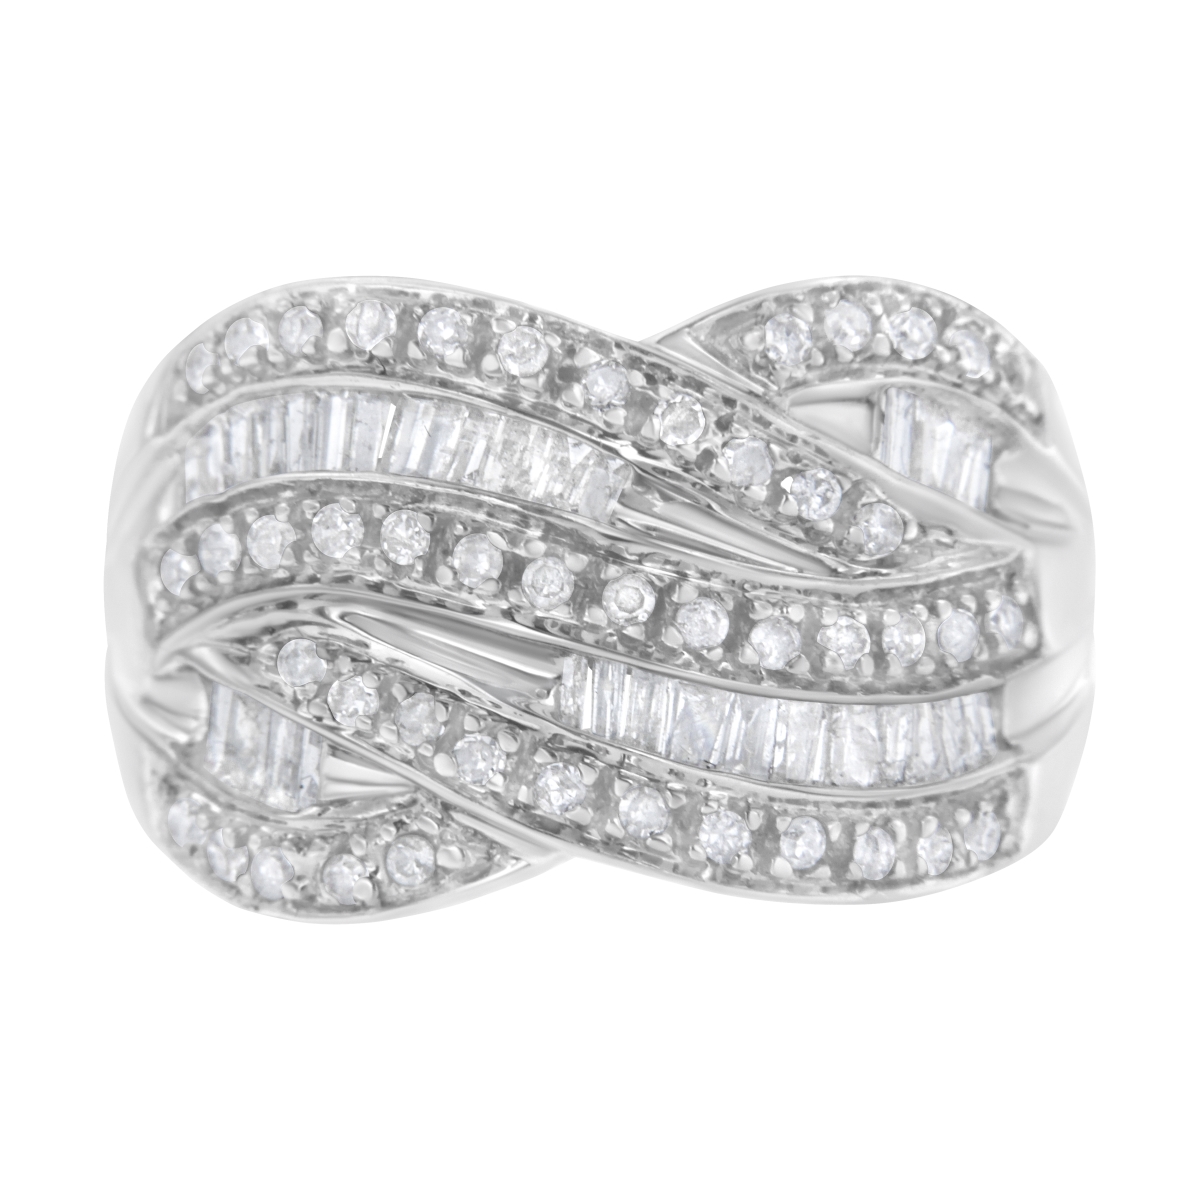 Picture of Infinite Jewels 018909R900 White .925 Sterling Silver 1.0 CTTW Channel Set Alternating Round & Baguette Diamond Cross-Over Bypass Ring Band&#44; I-J Color - I2-I3 Clarity - Size 9